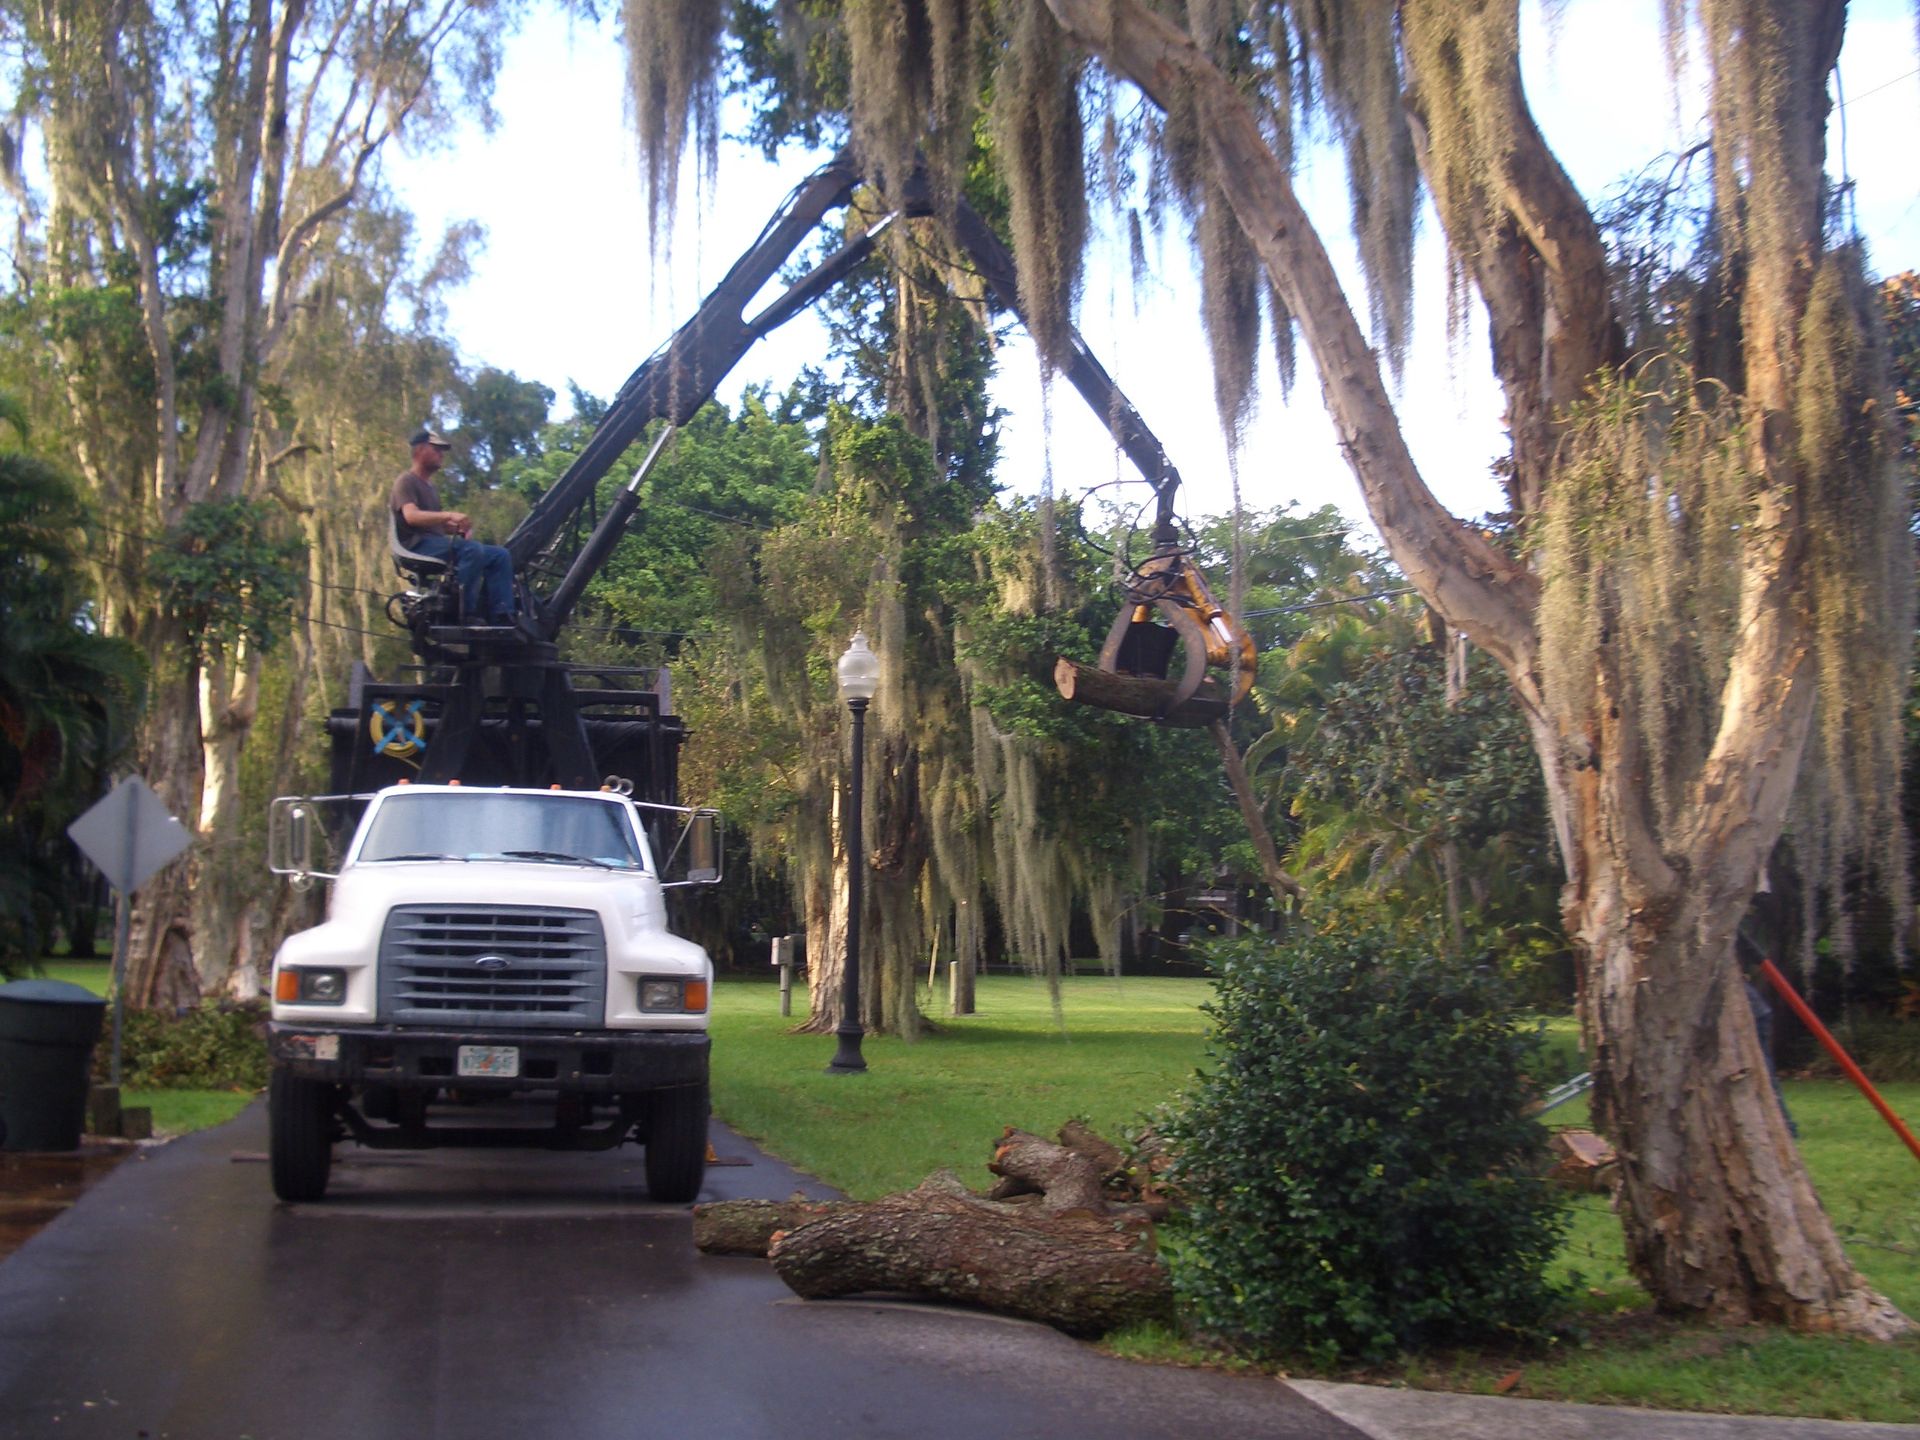 England's tree service in North Fort Myers, FL